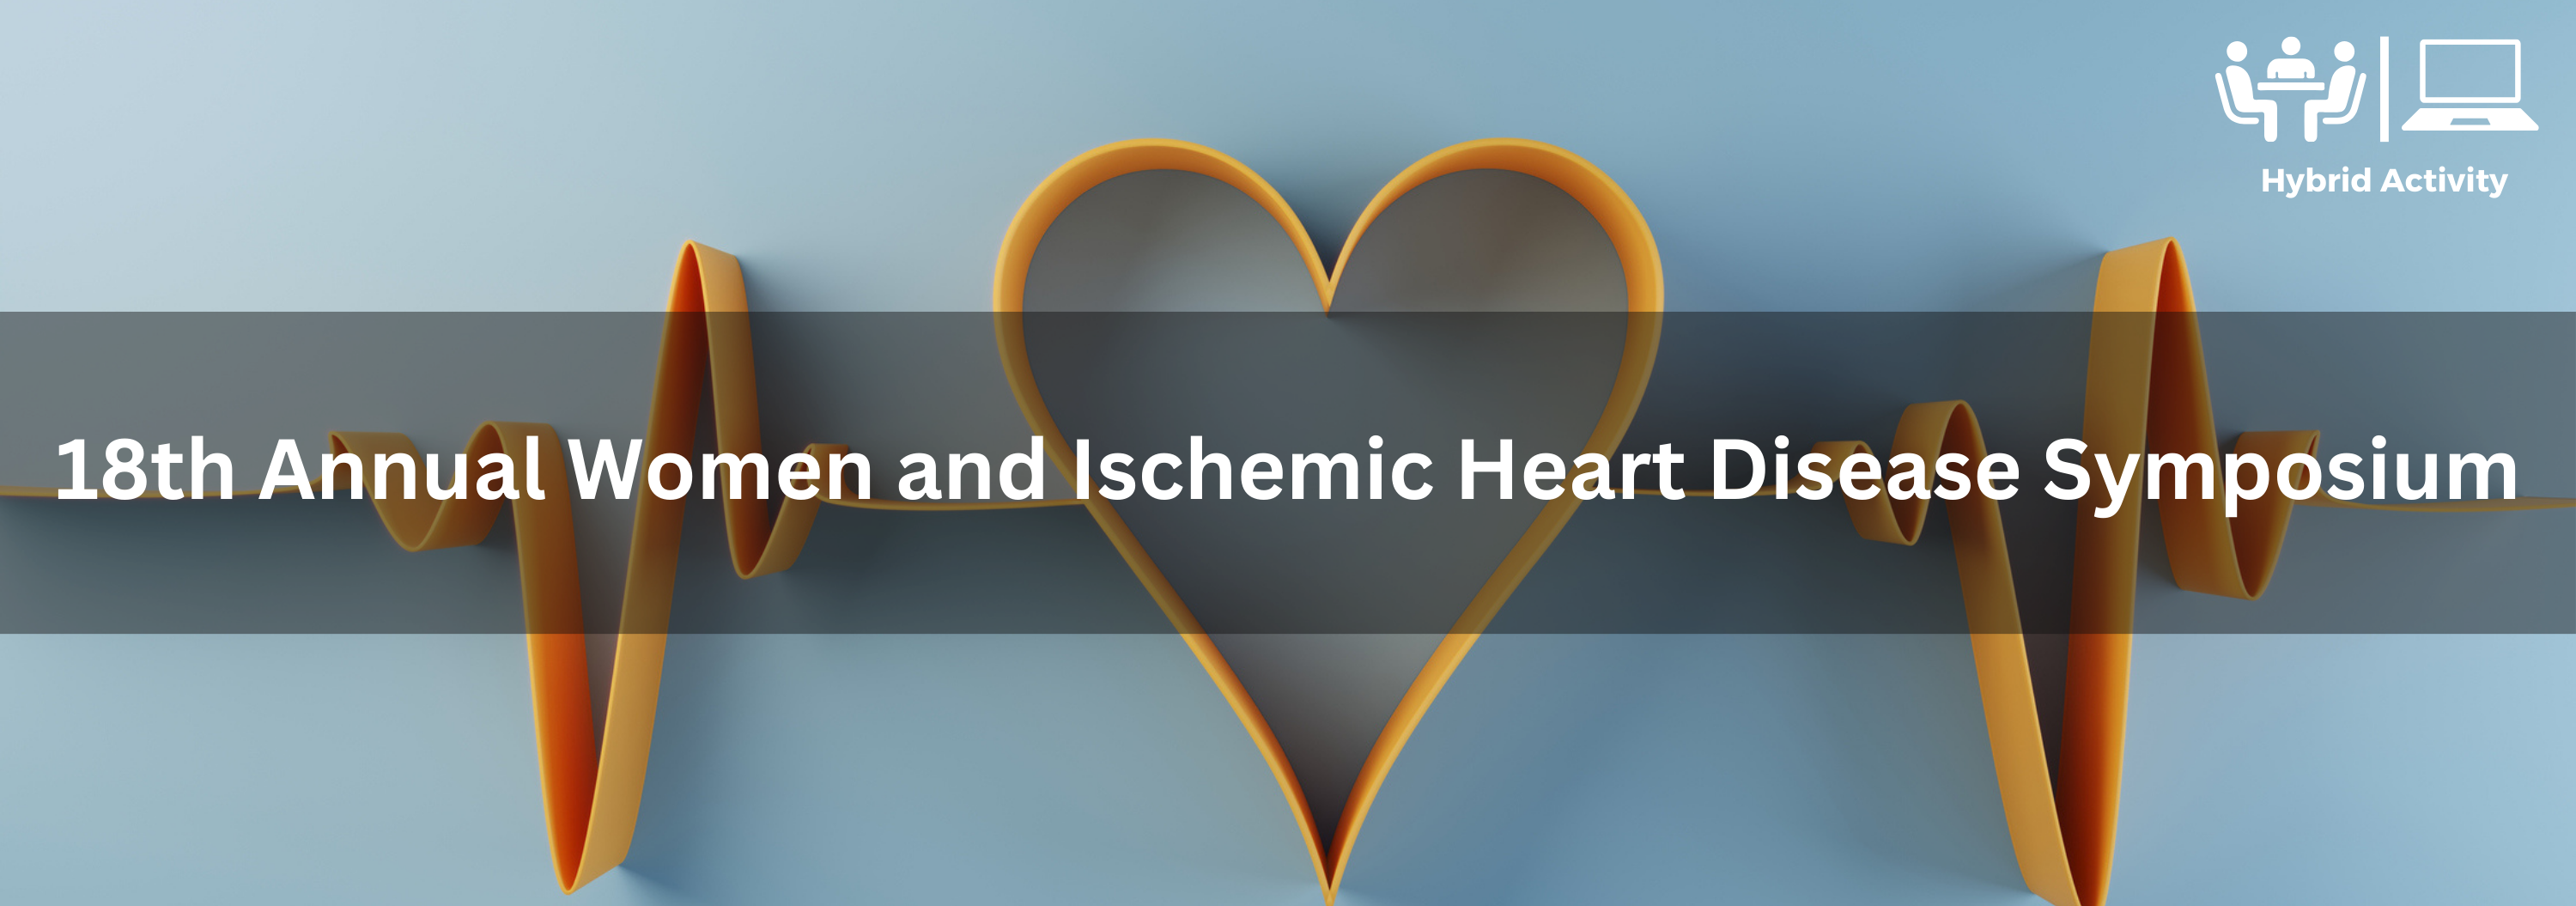 18th Annual Women and Ischemic Heart Disease Symposium Banner